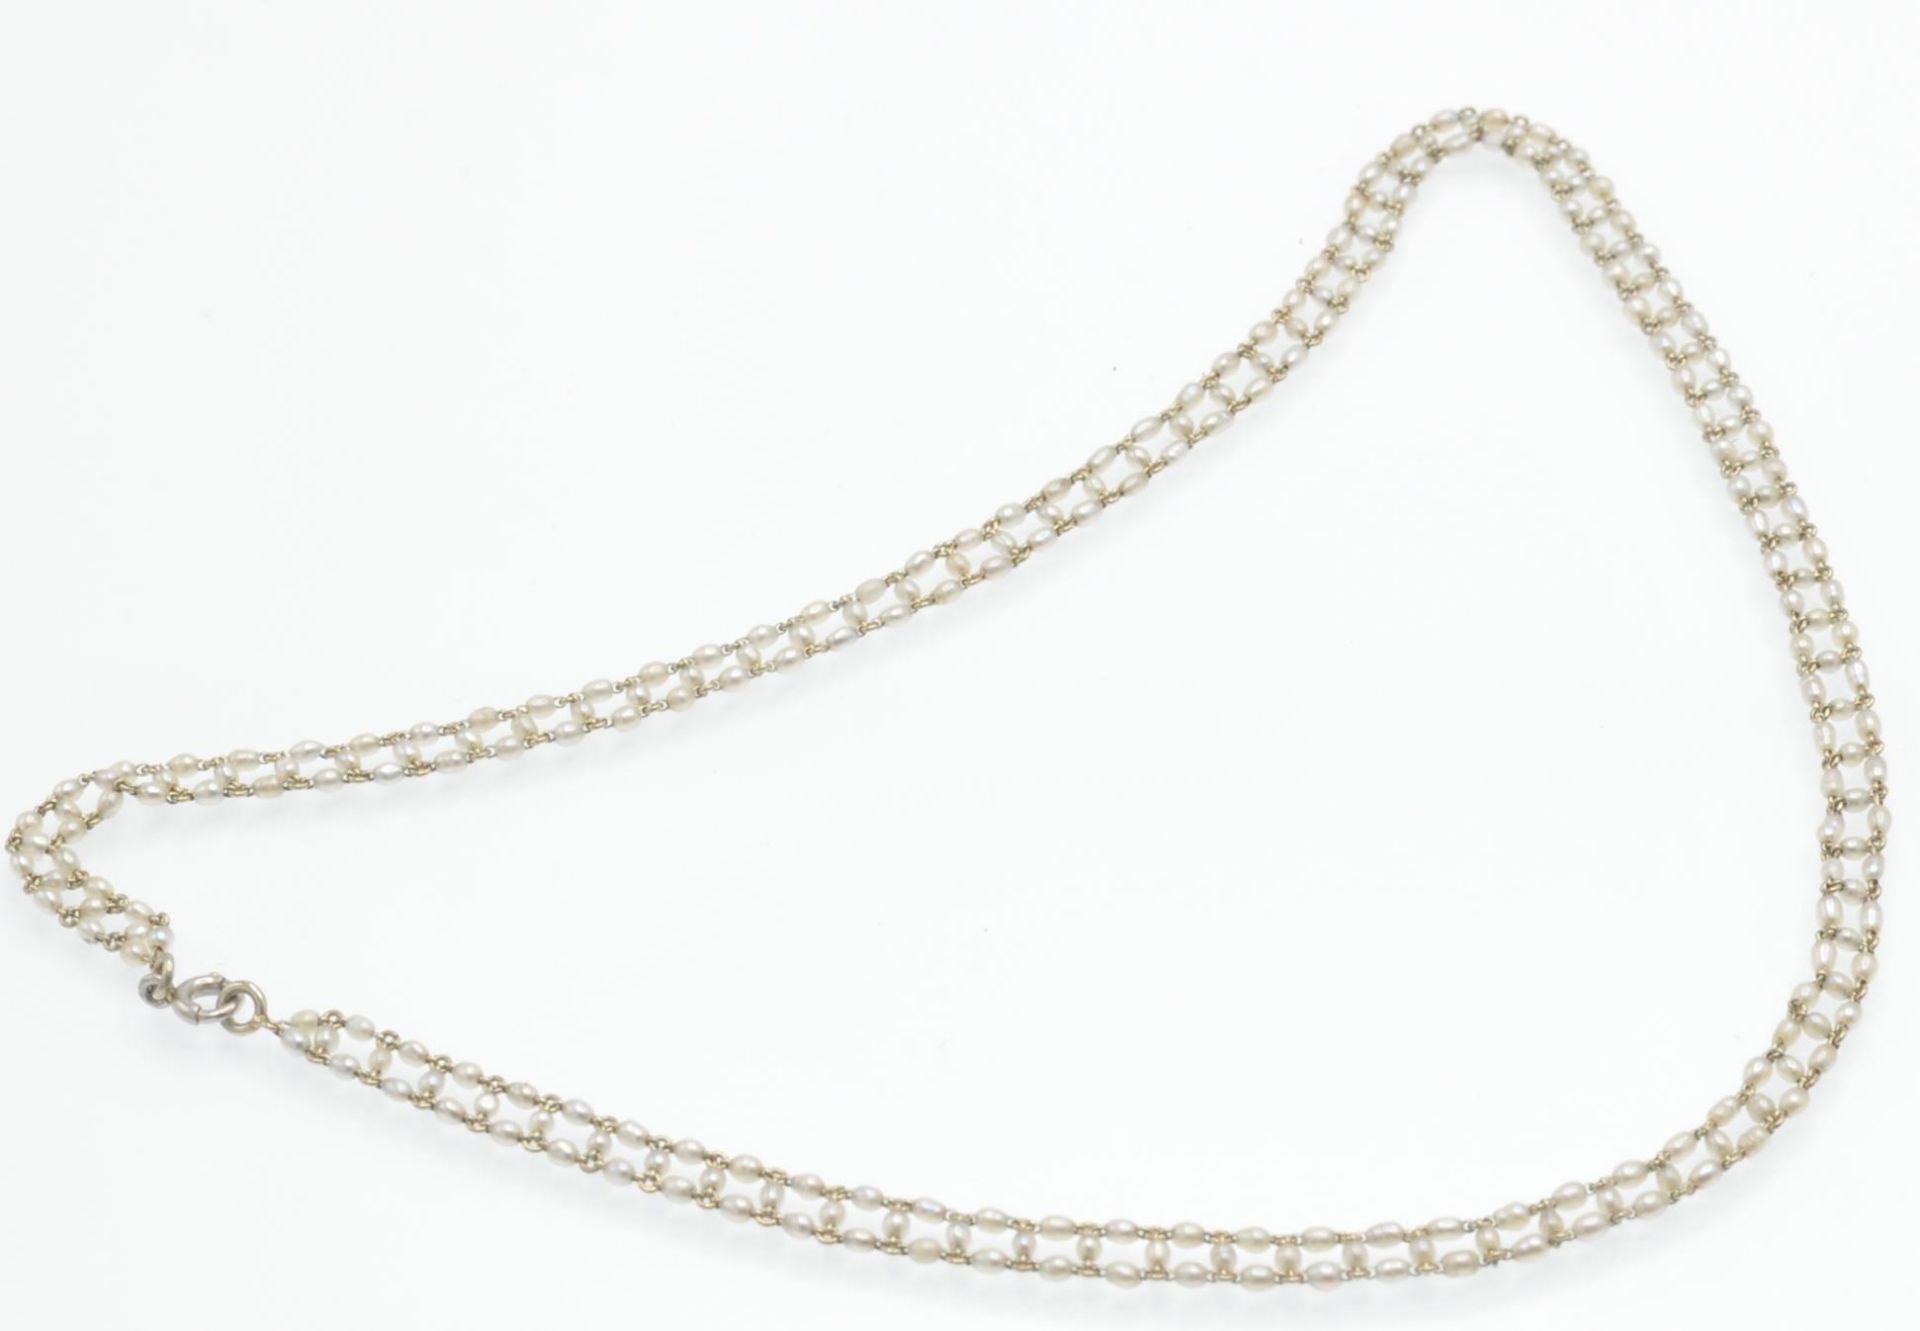 An 18ct Gold & Seed Pearl Choker Necklace - Image 3 of 6